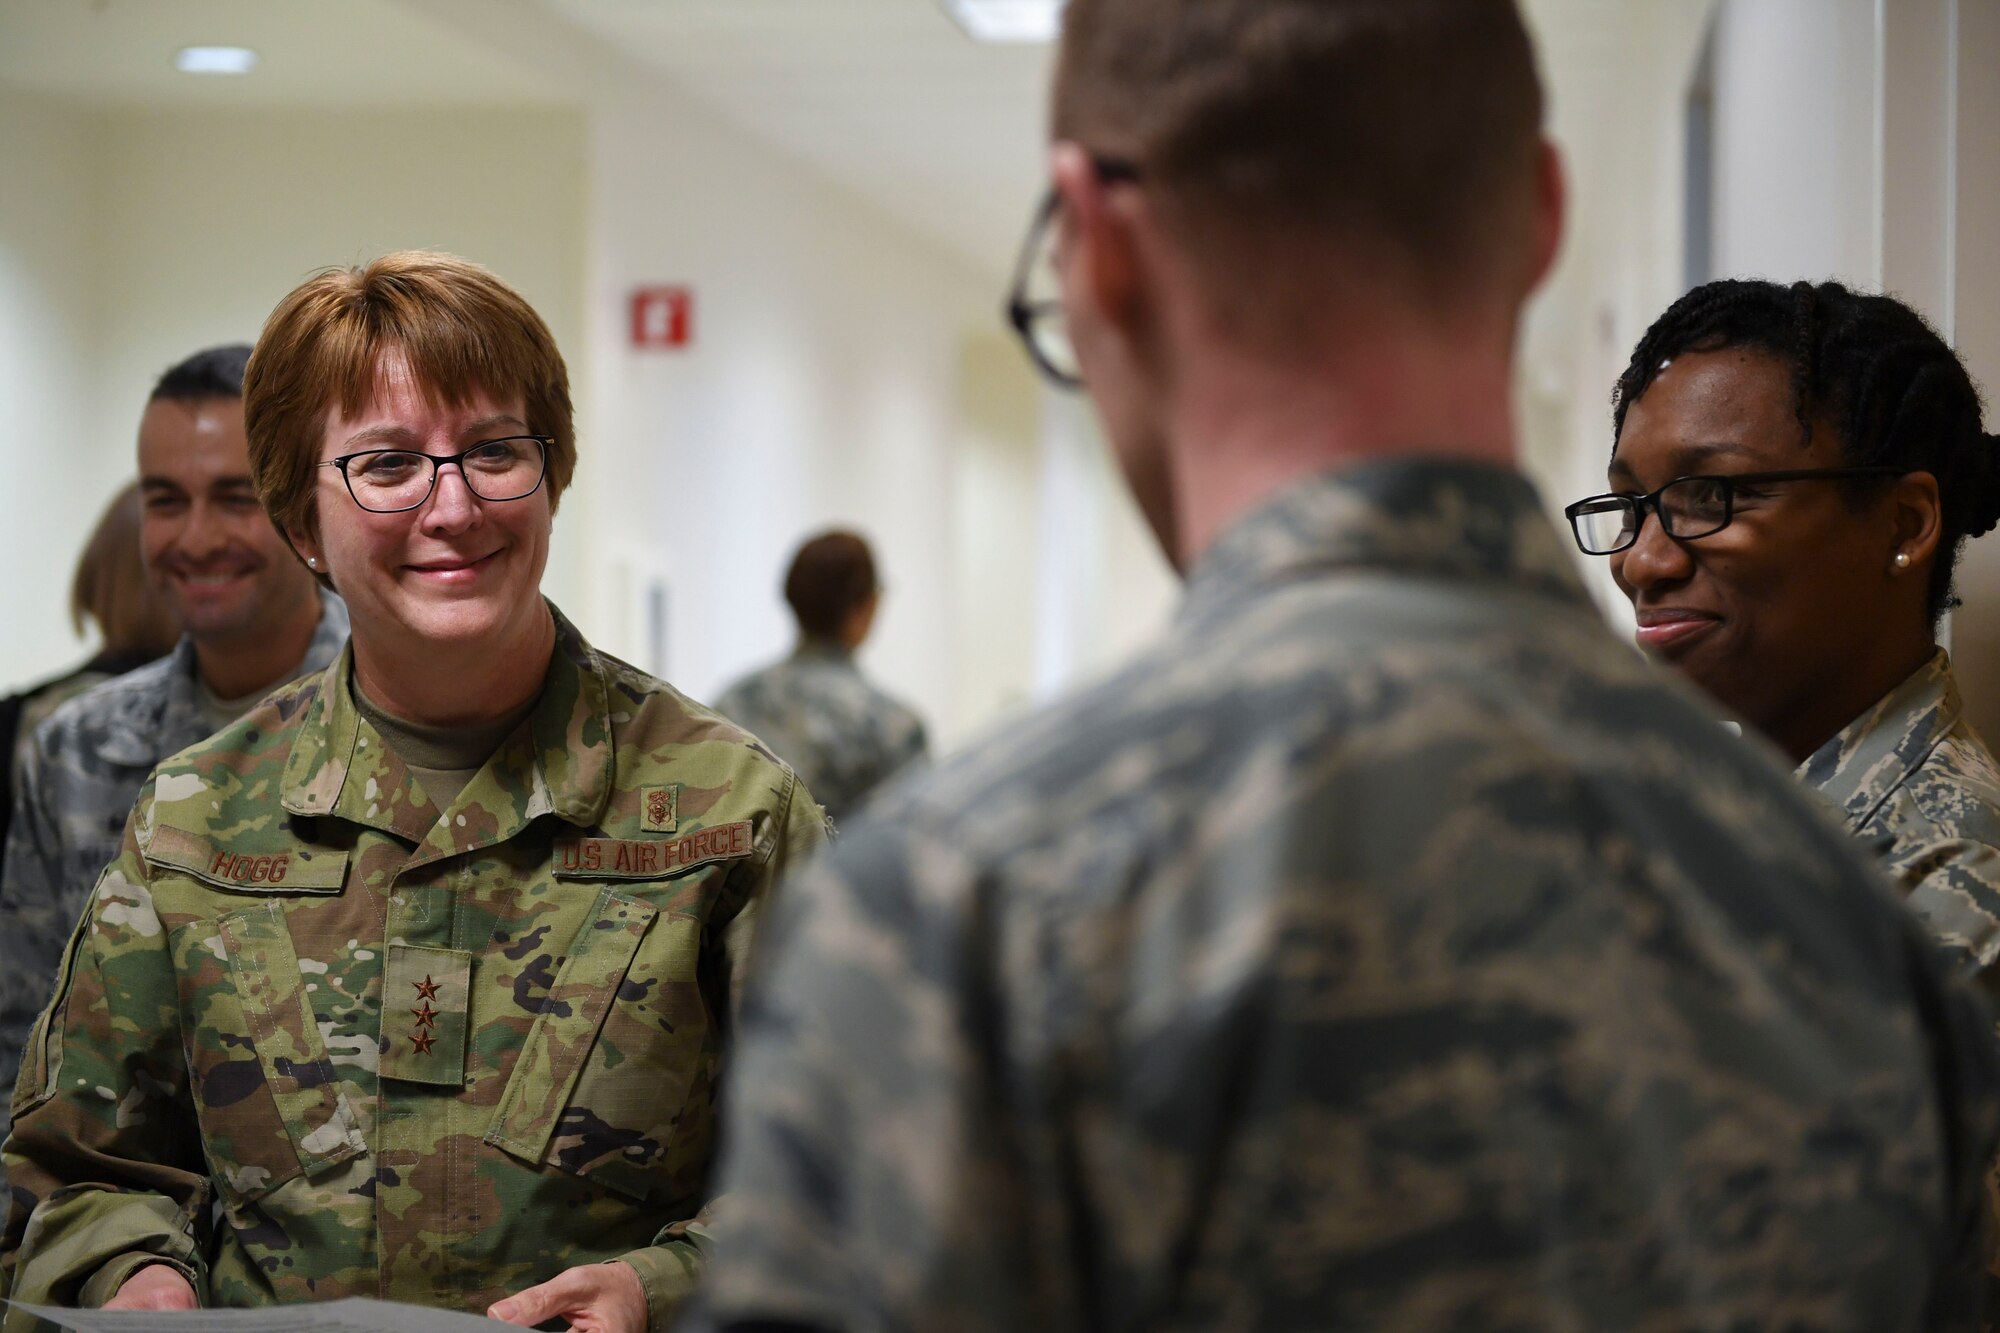 U.S. Air Force Lt. Gen. Dorothy A. Hogg, Surgeon General, and Chief Master Sgt. G. Steve Cum, Chief, Medical Enlisted Force and Enlisted Corps Chief, tour medical facilities at Joint Base Langley-Eustis, Va., Jan. 9, 2019. They spoke about readiness revitalization at various stops, which included Langley’s intensive care unit, flight medicine unit, logistics warehouse, and dental and family medicine clinics. (U.S. Air Force photo by Airman 1st Class Monica Roybal)